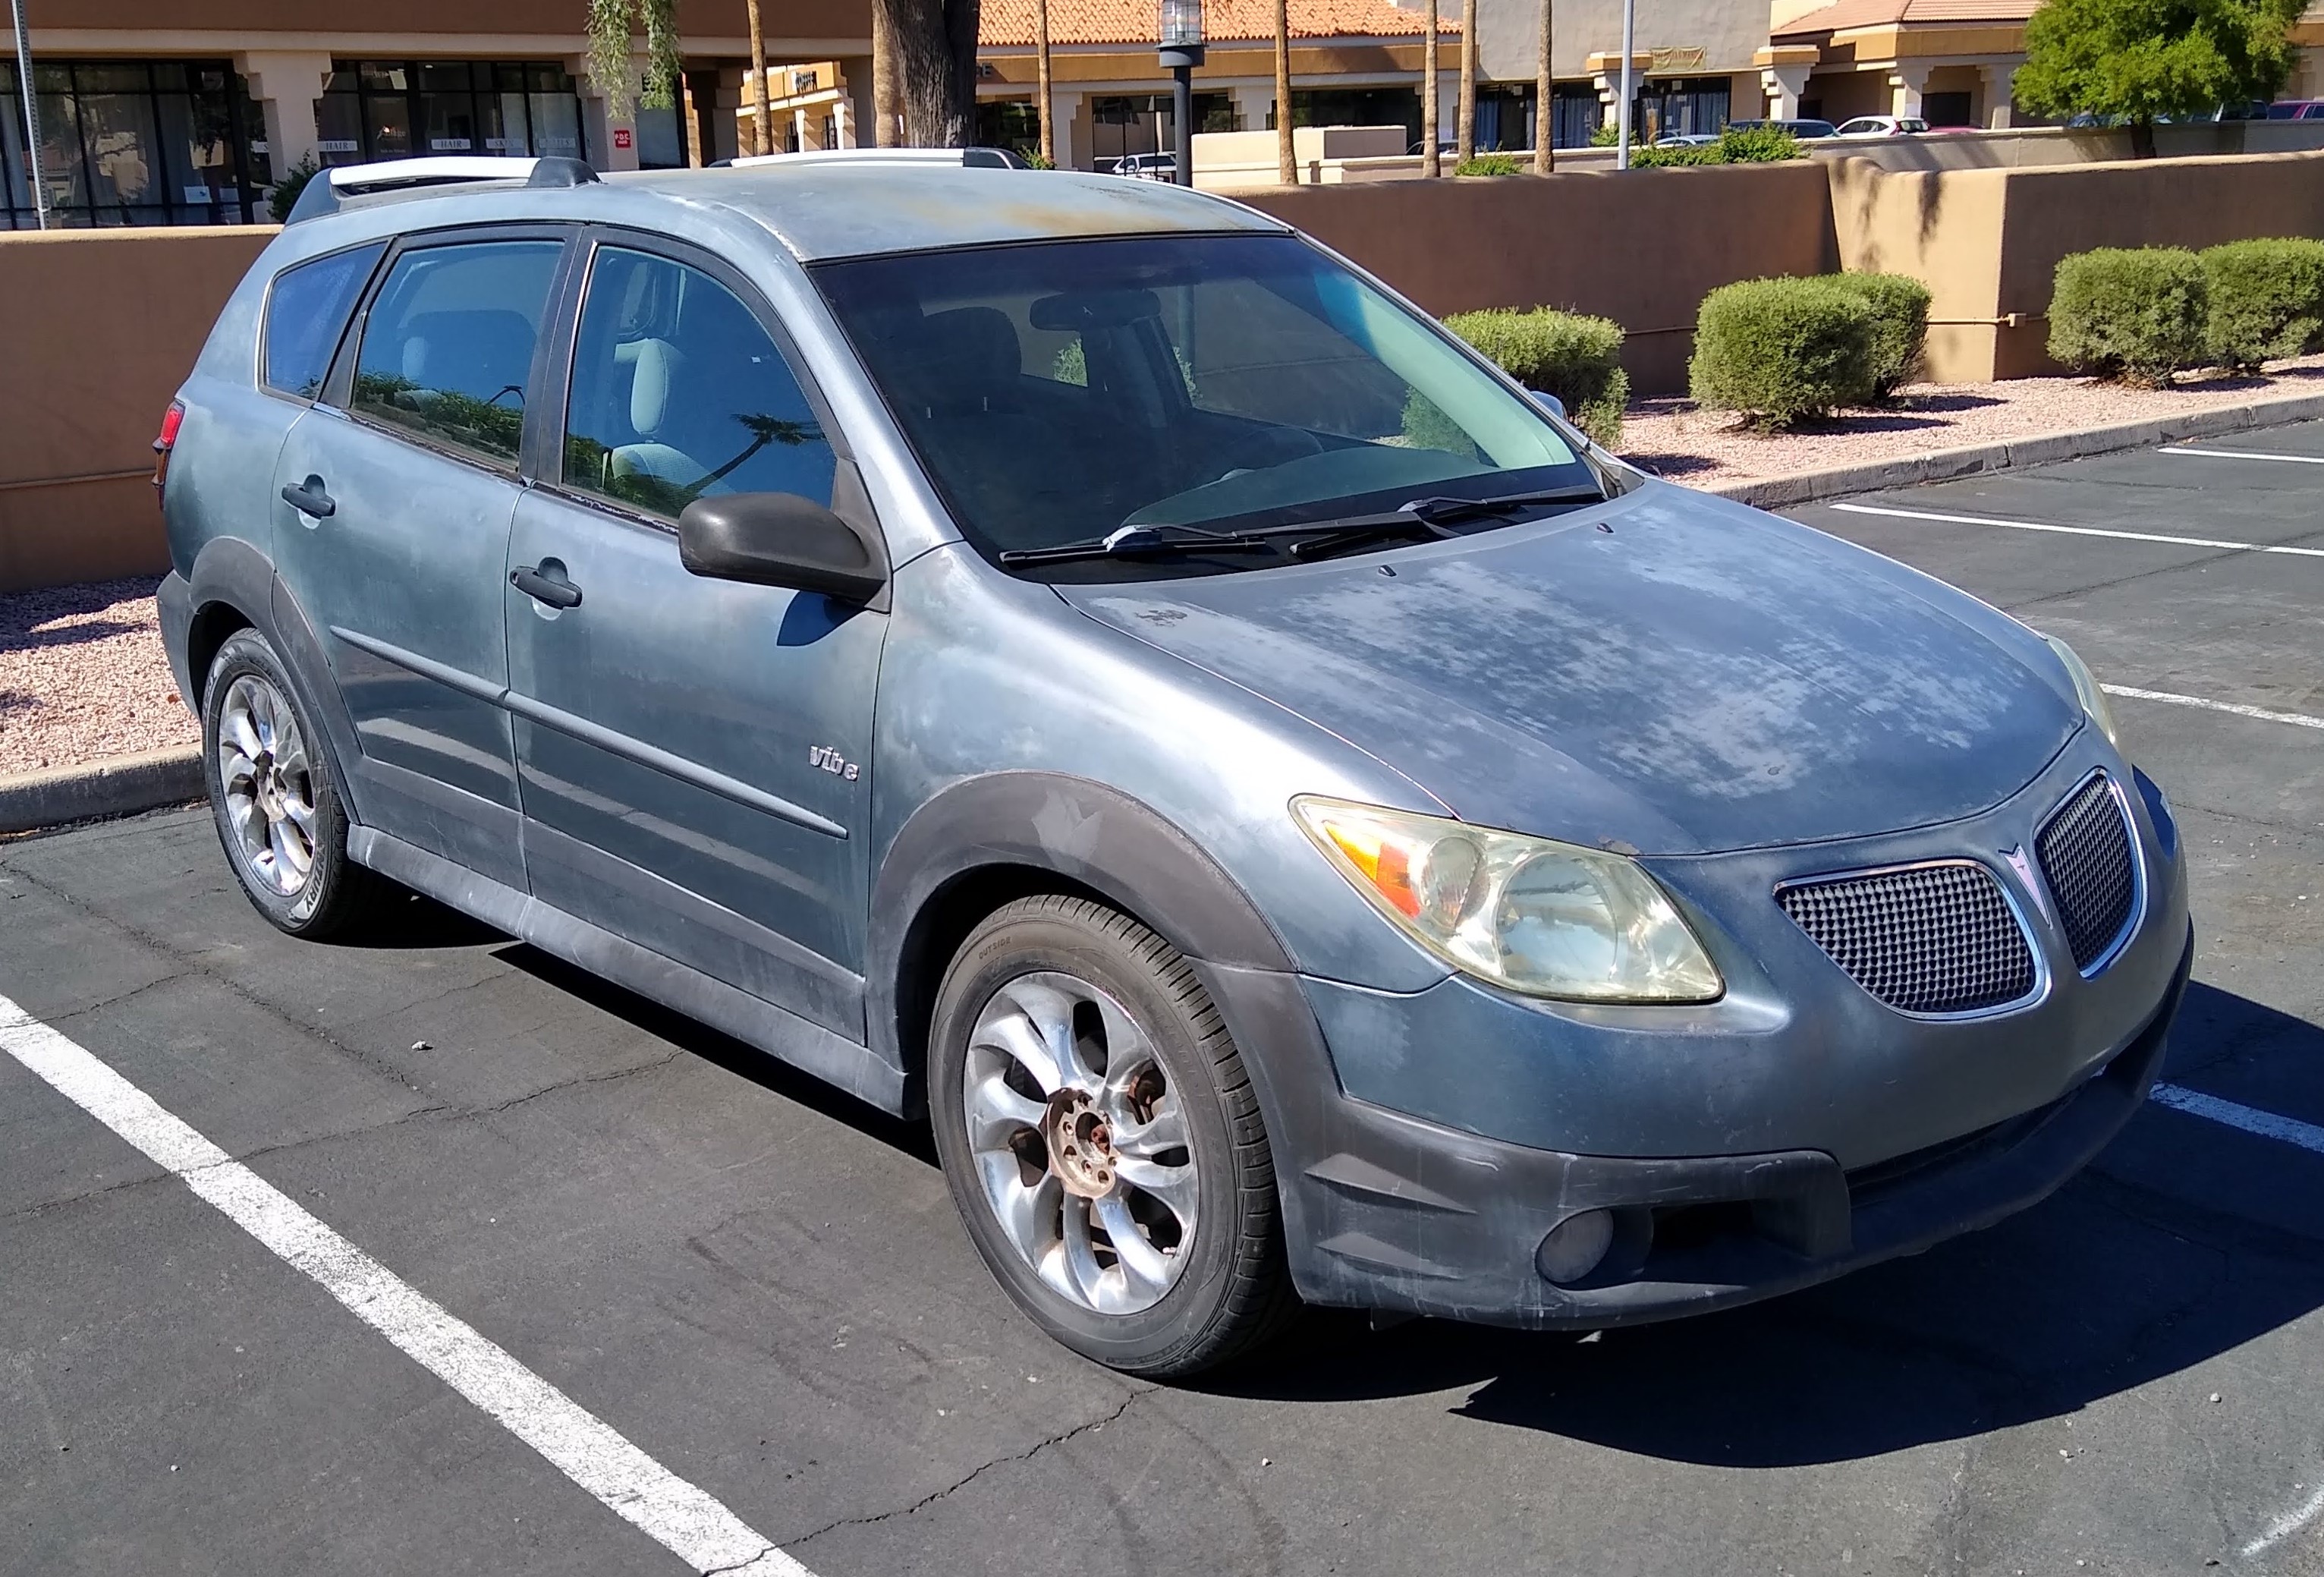 Pontiac Vibe for Sale in Mesa, AZ (Test Drive at Home) - Kelley Blue Book